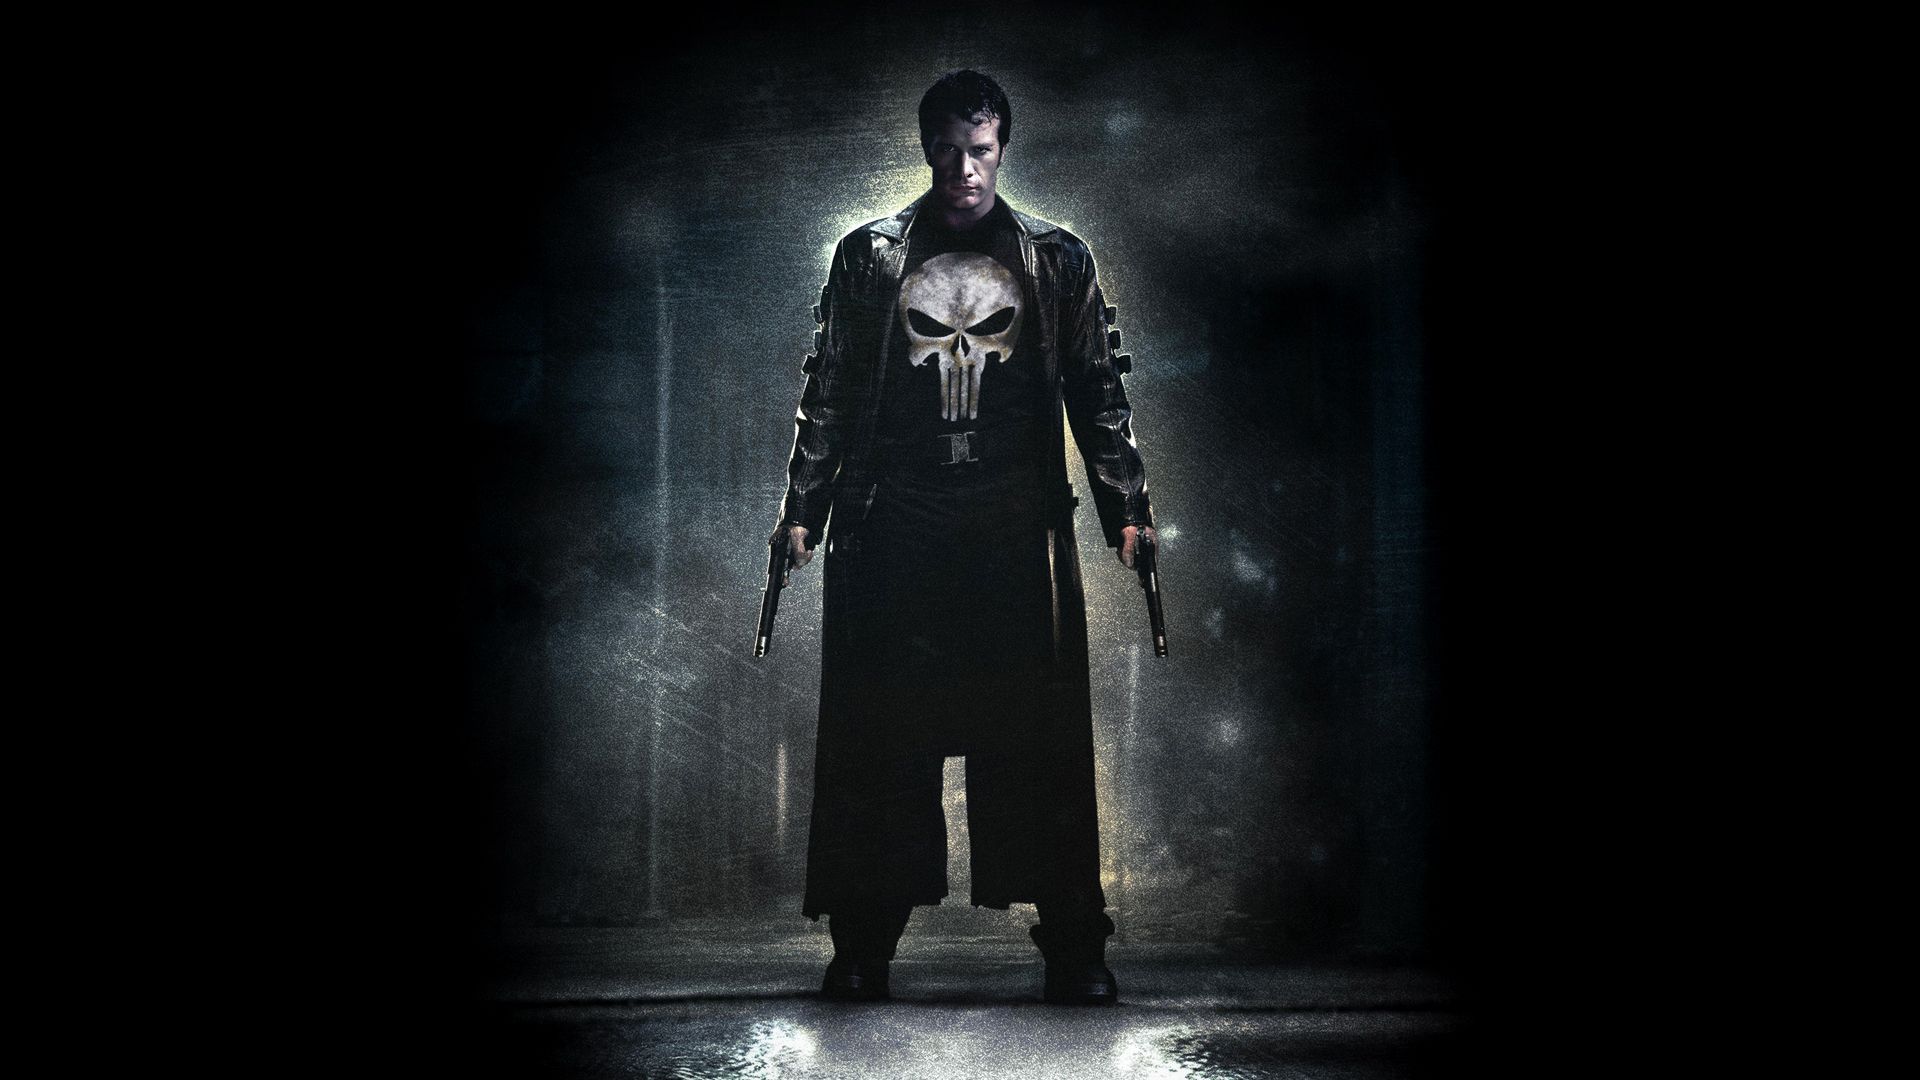 Punisher Background HD Wallpapers Attachment 9090 - HD Wallpaper Site